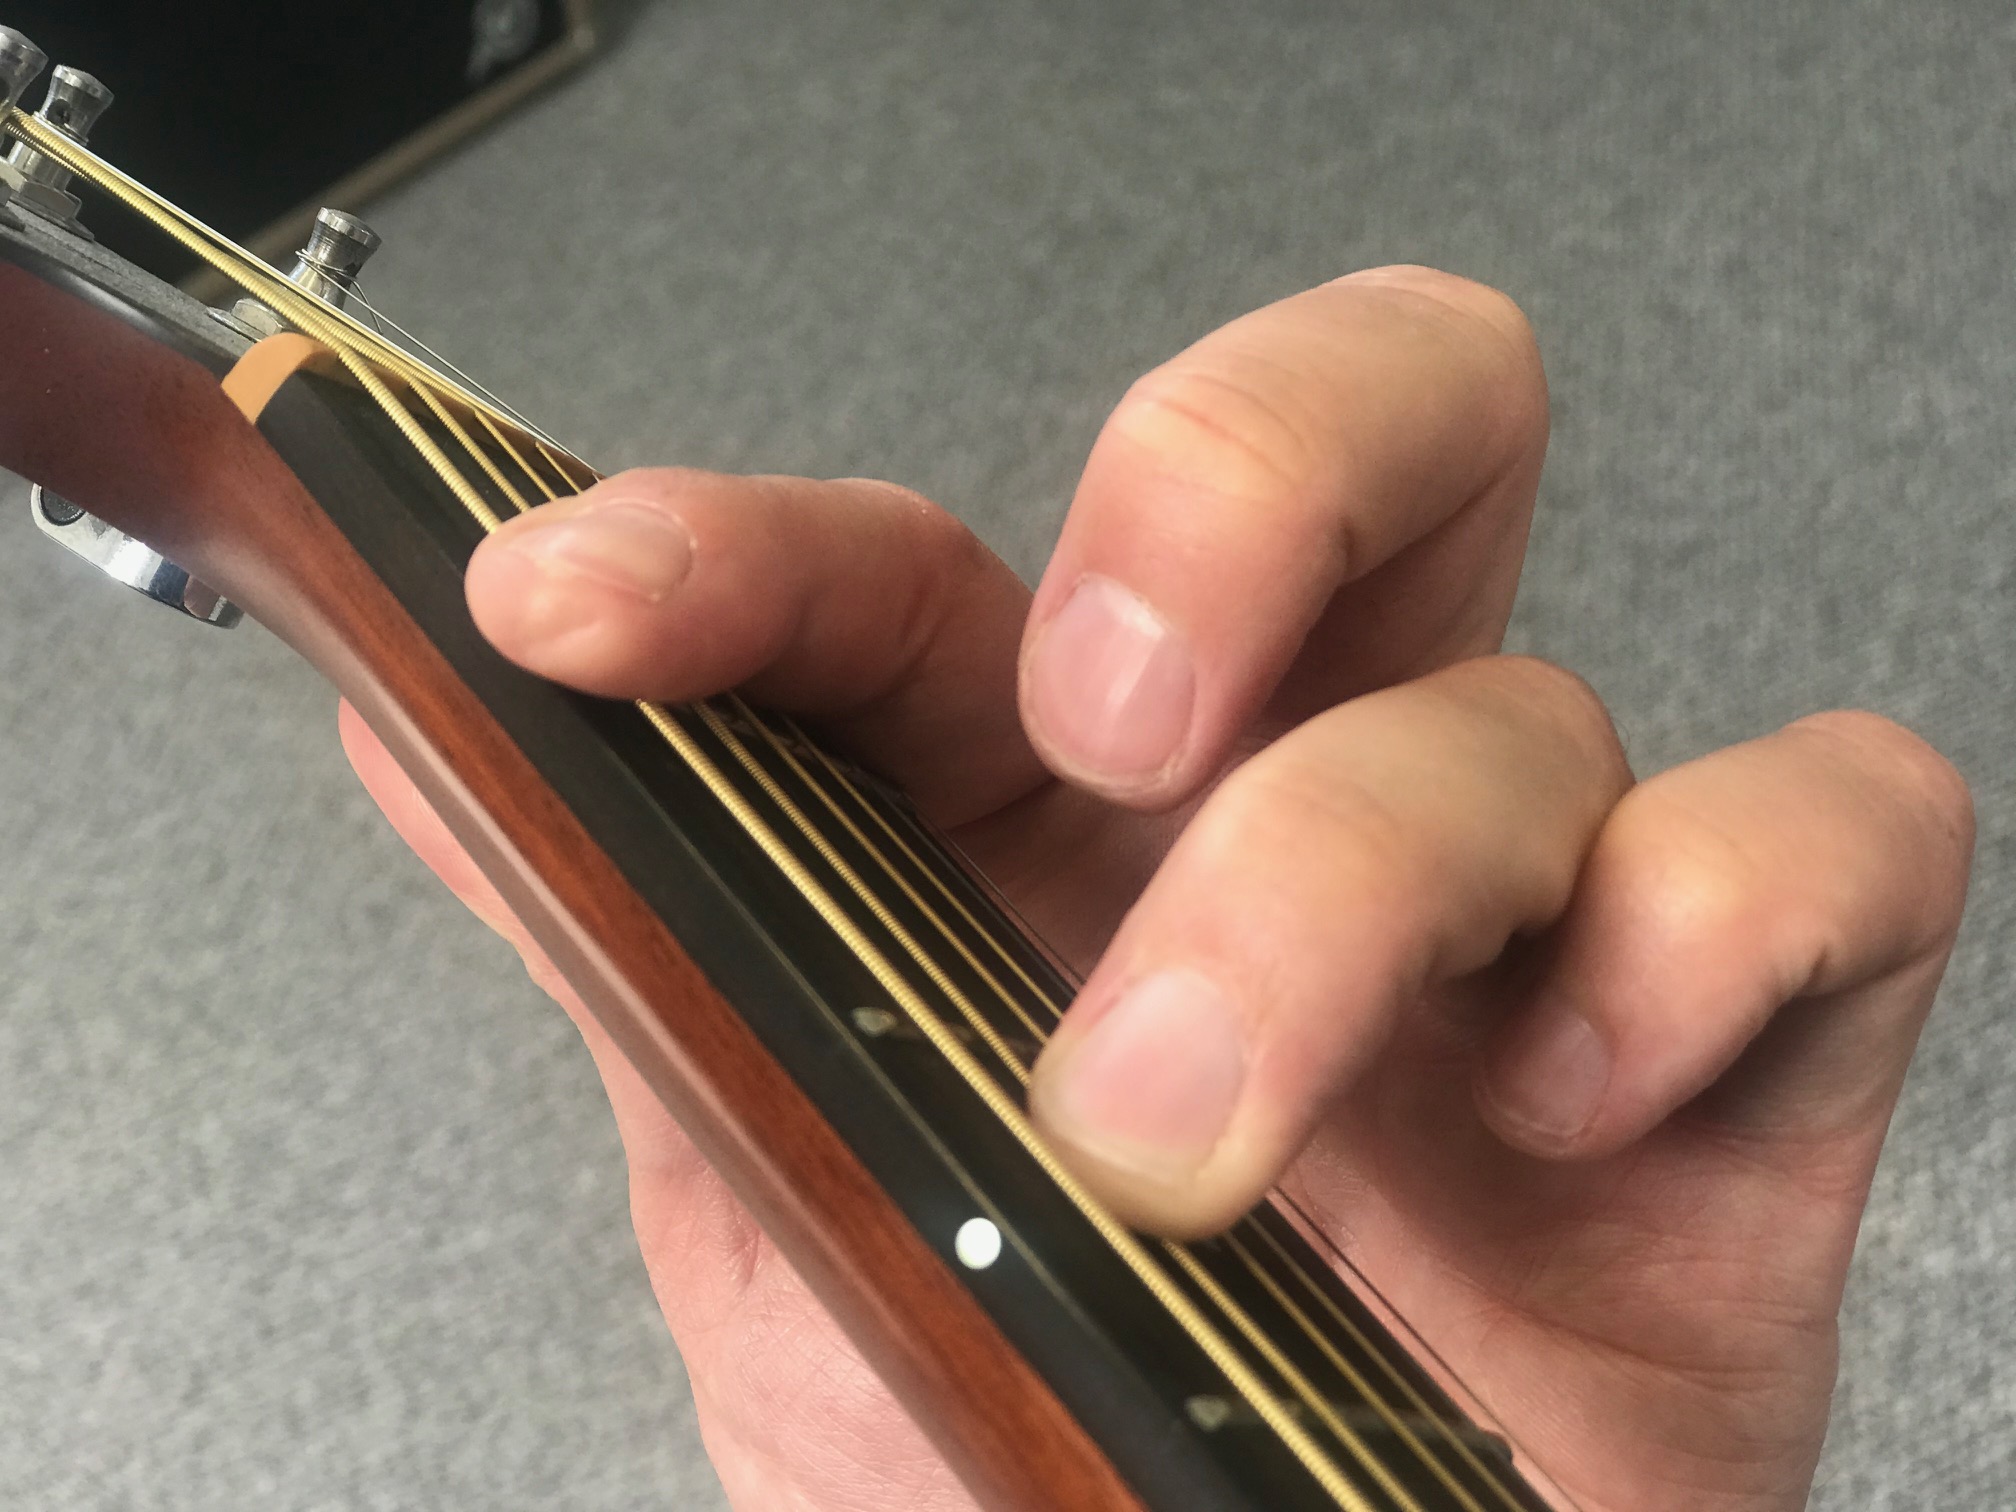 How To Play The Fm7 Chord On Acoustic Guitar - Drue James